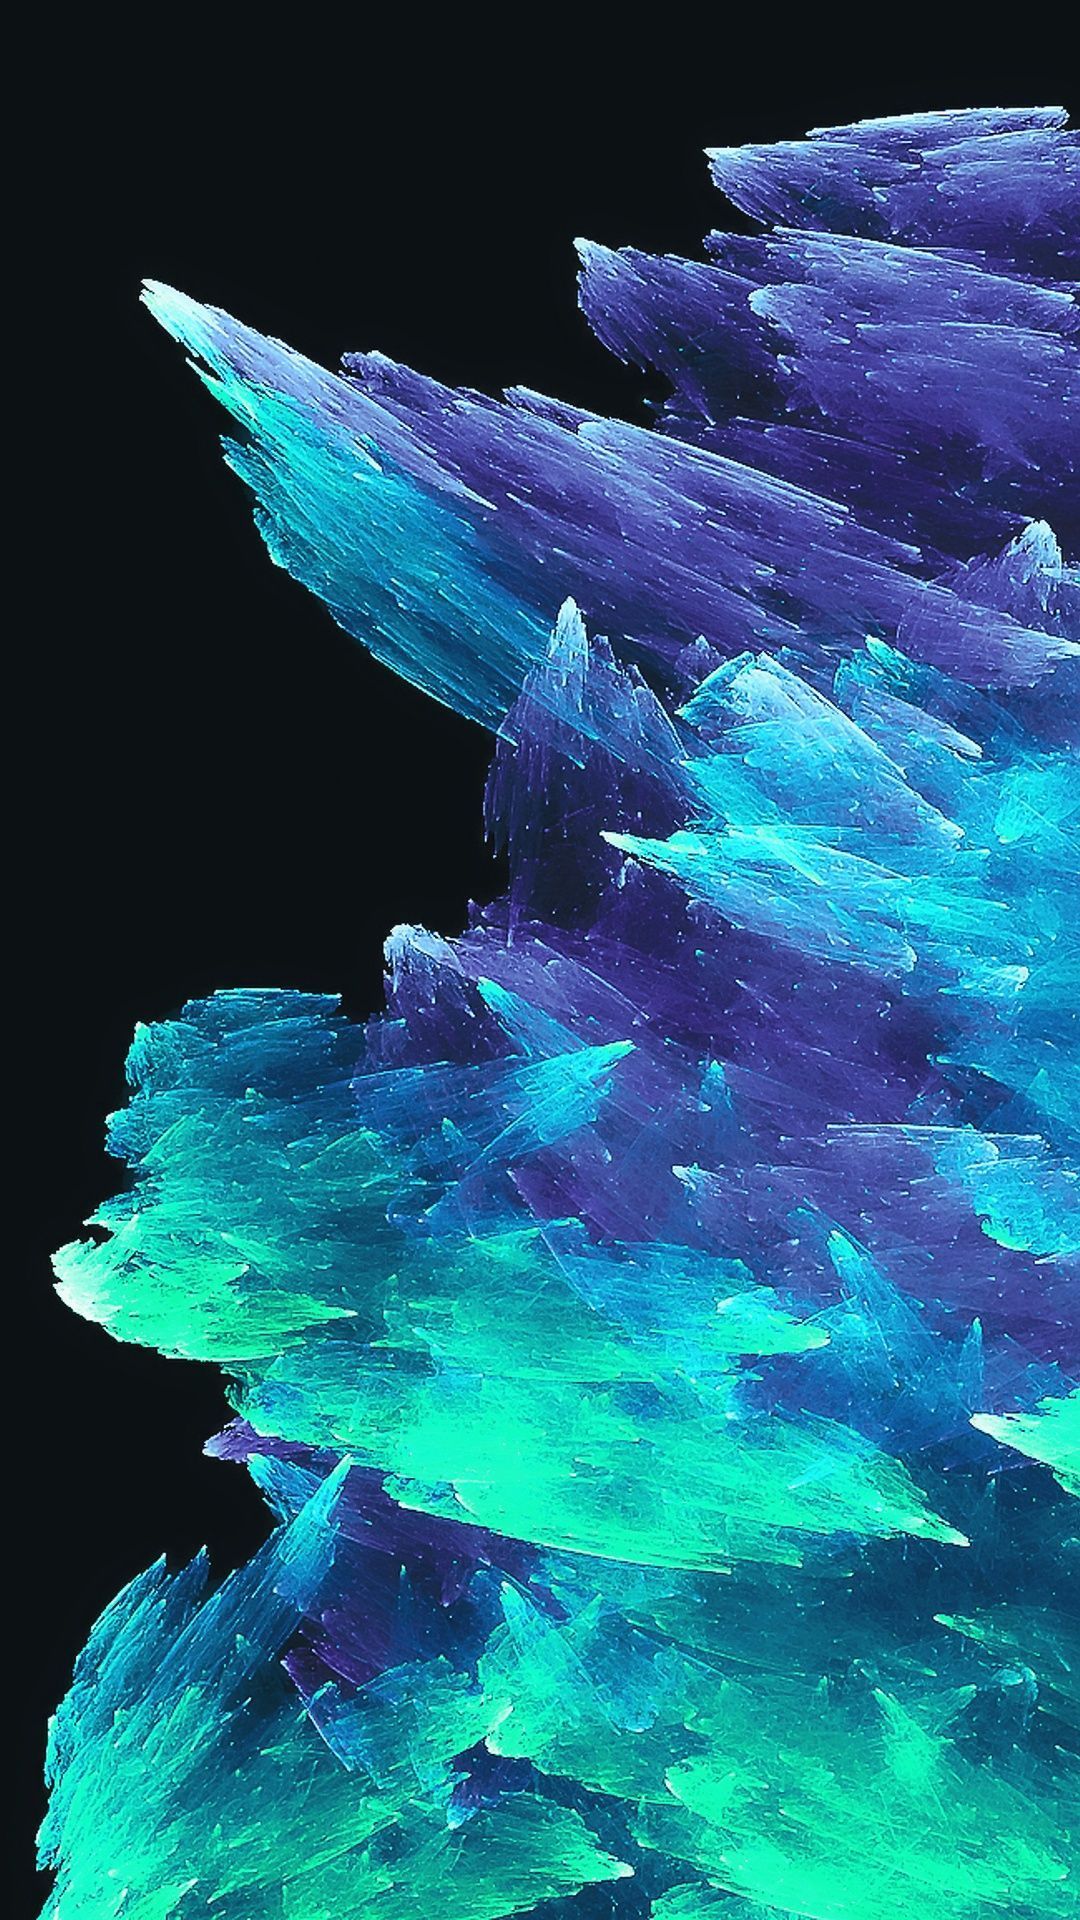 Abstract Diamonds 003 wallpaper for 1080x1920 mobile devicesx1920 # abstract #devices #di. Android phone wallpaper, Abstract wallpaper, Abstract art wallpaper